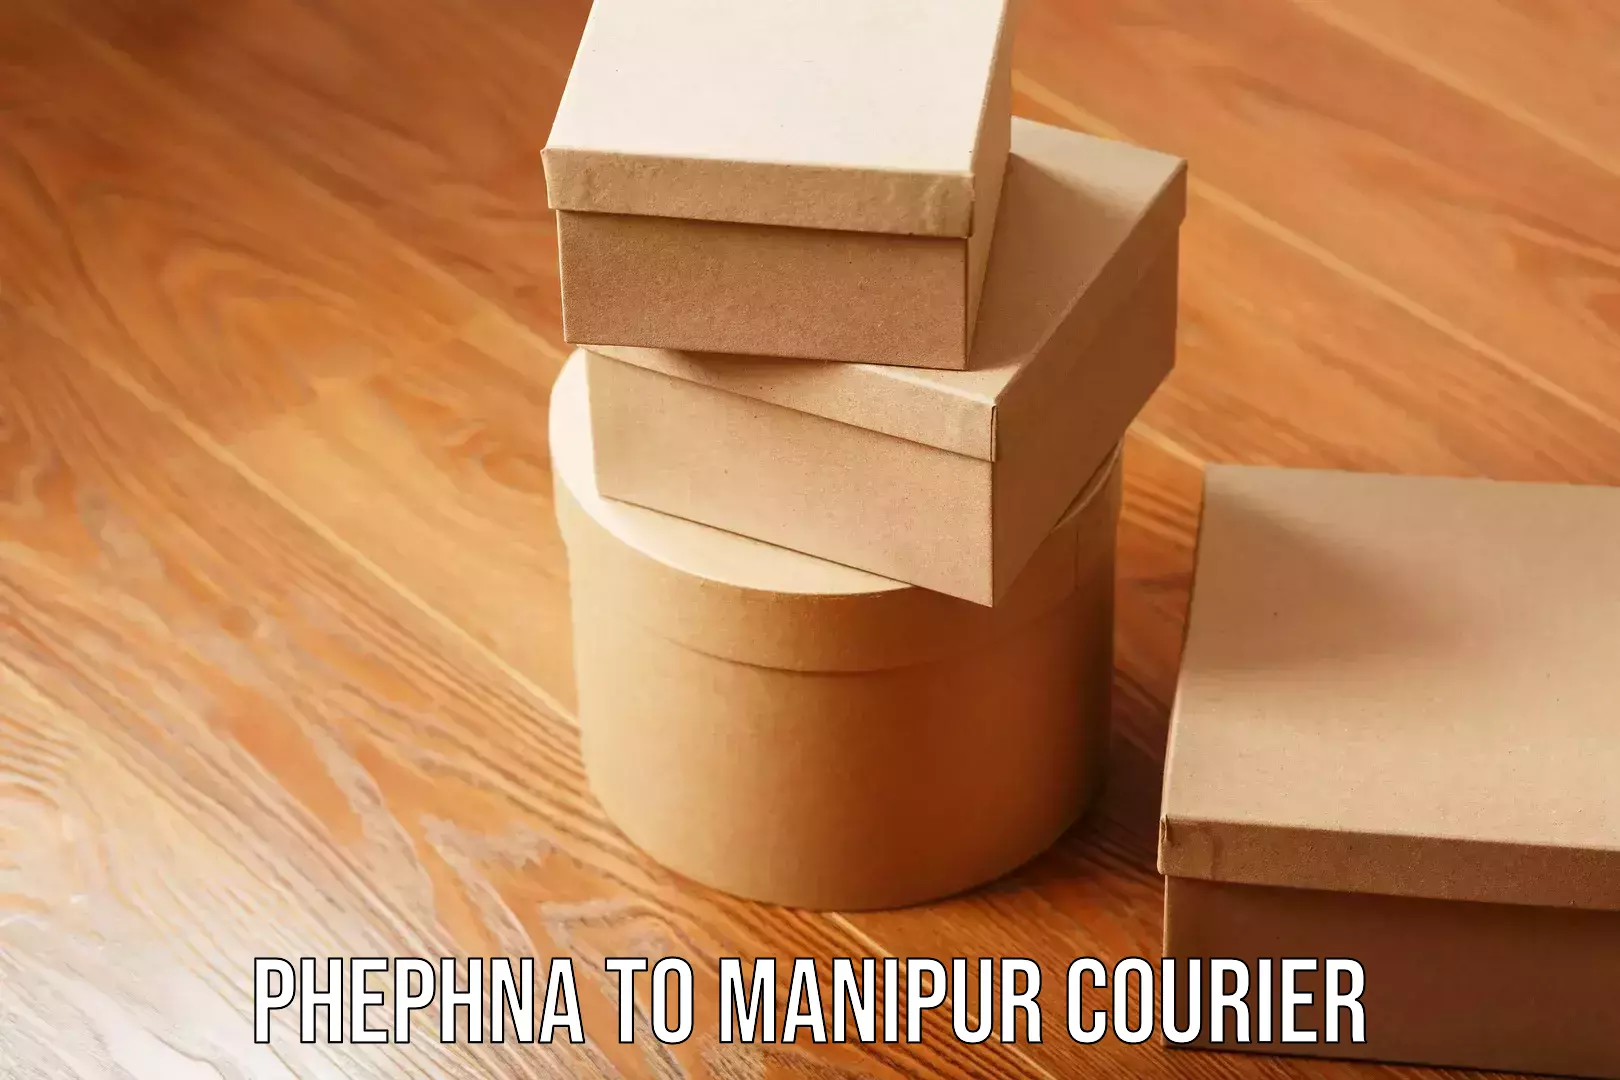 Trusted furniture transport Phephna to Manipur